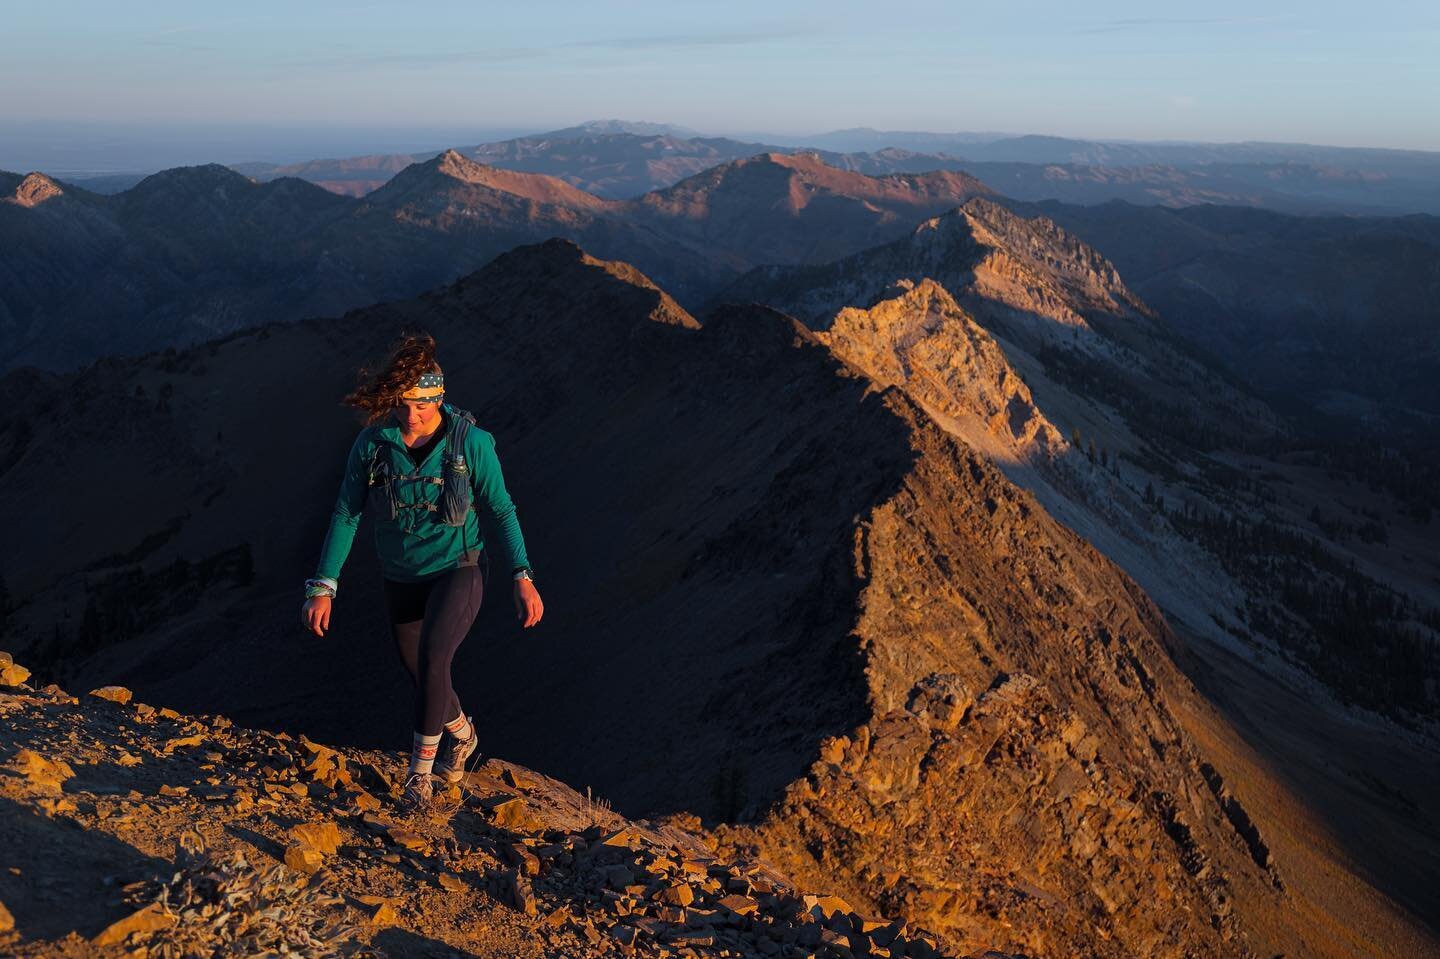 Most of the time I don&rsquo;t bring my camera, but sometimes I do. 

These snaps of @albravs was from a little dawn patrol to the top of mt superior and probably one of my favorite peaks to walk up in the #wasatch.